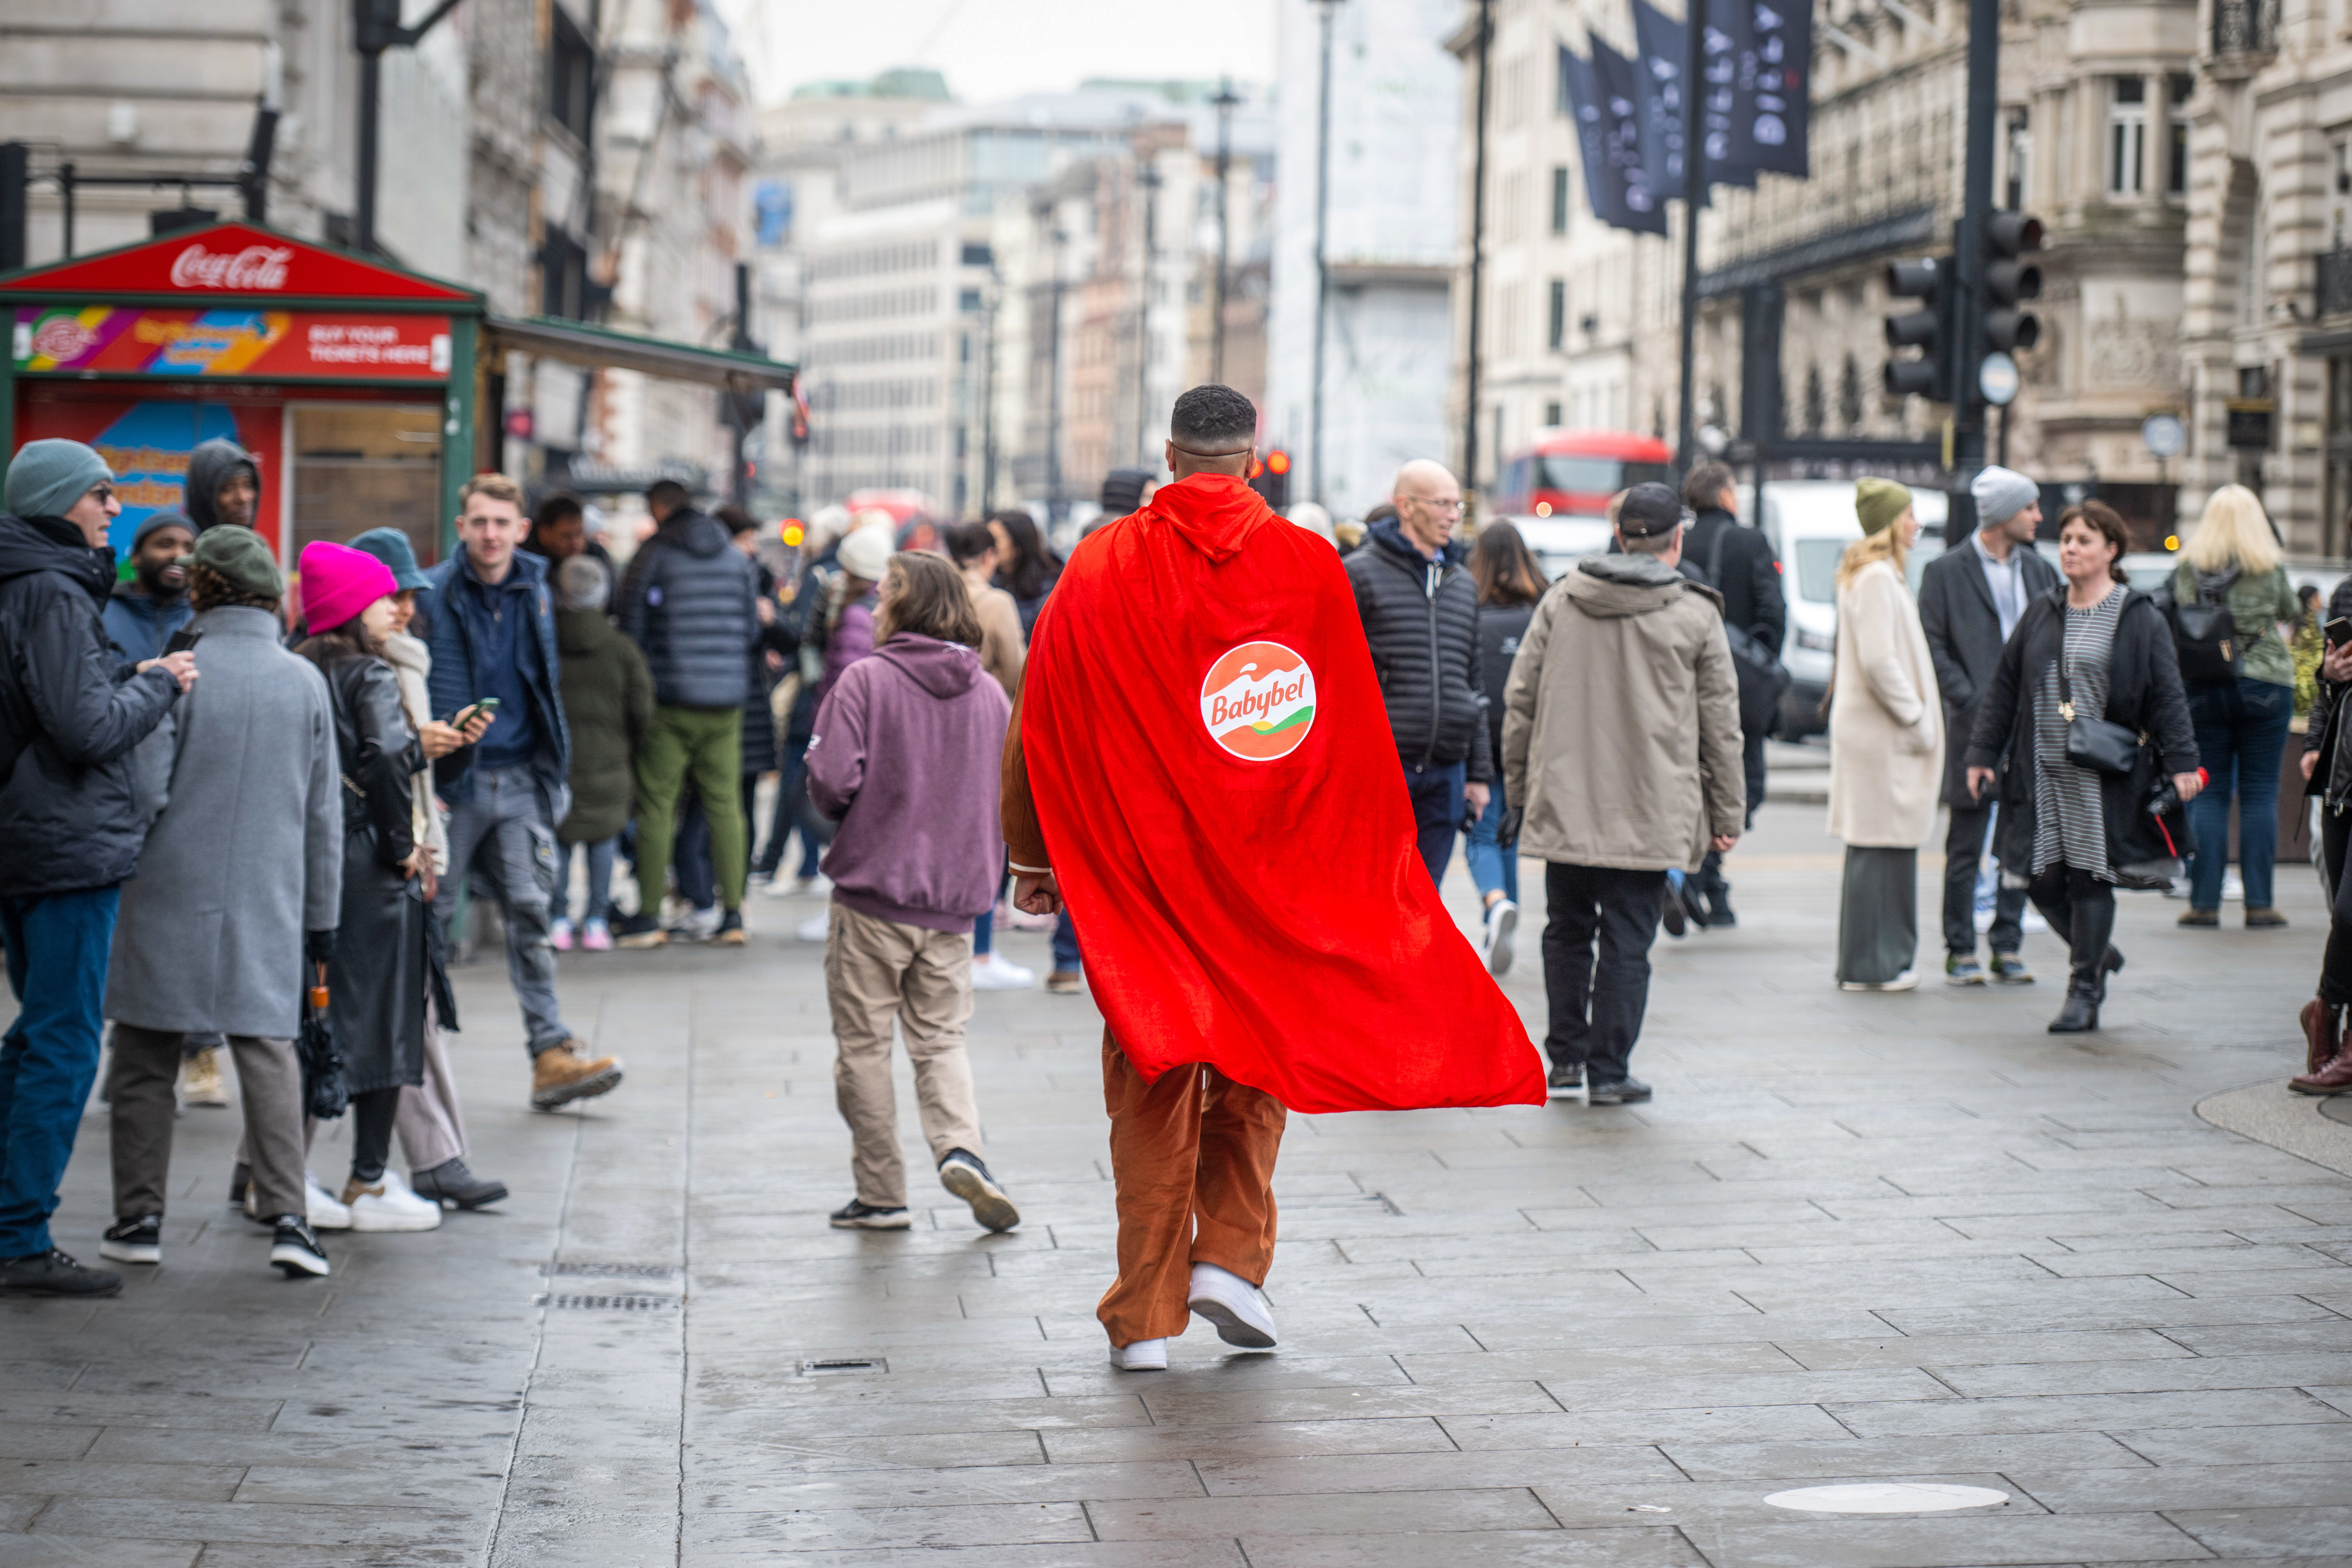 Babybel has teamed up with Diversity member, Jordan Banjo, who took to the streets of London to perform everyday heroic acts